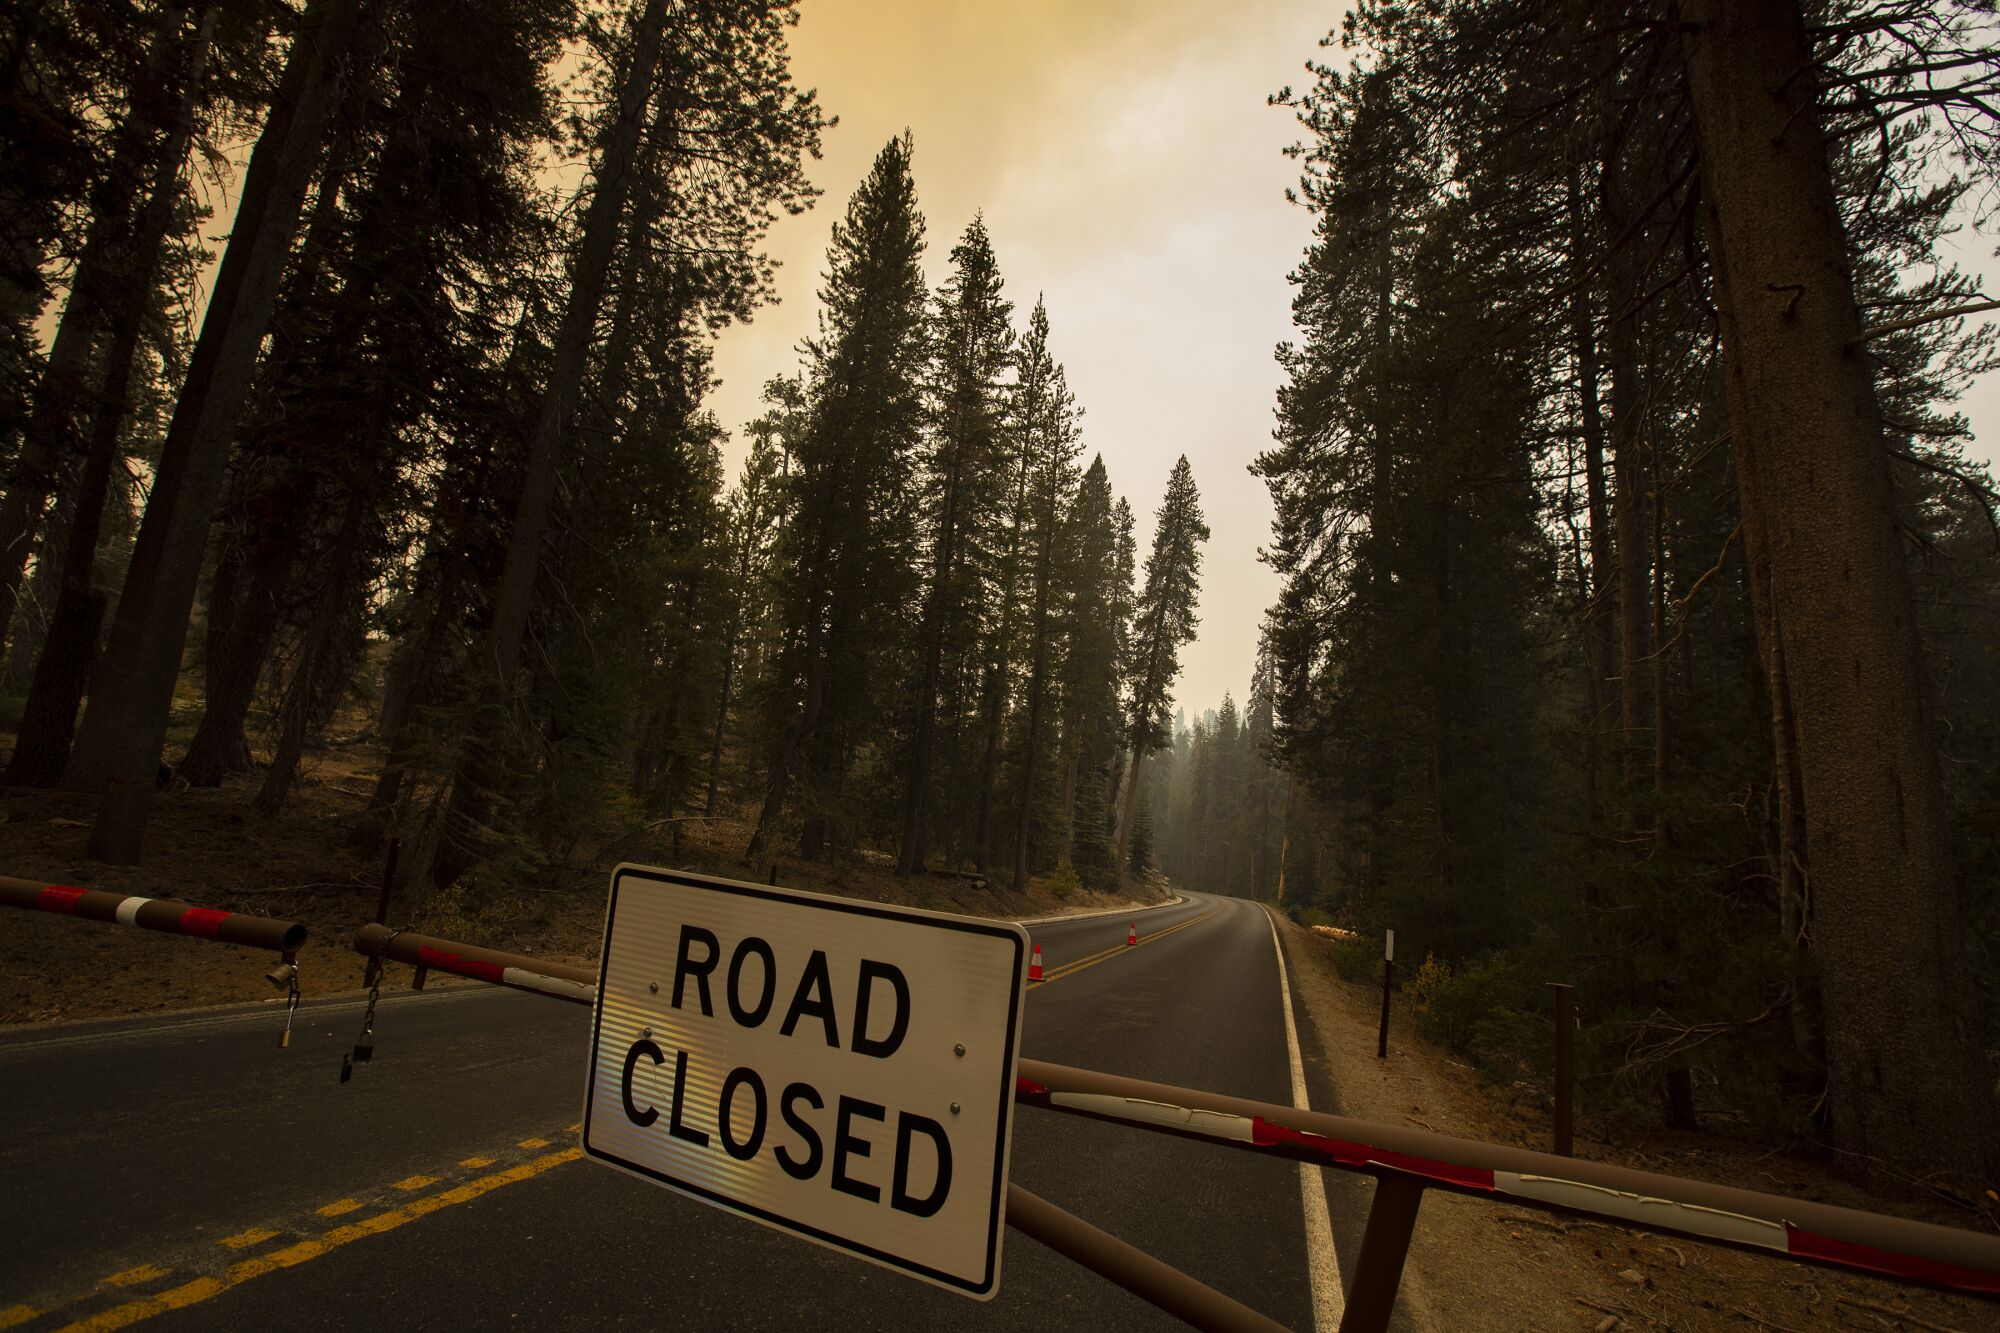  A road closed sign on a gate across a road with trees on either side